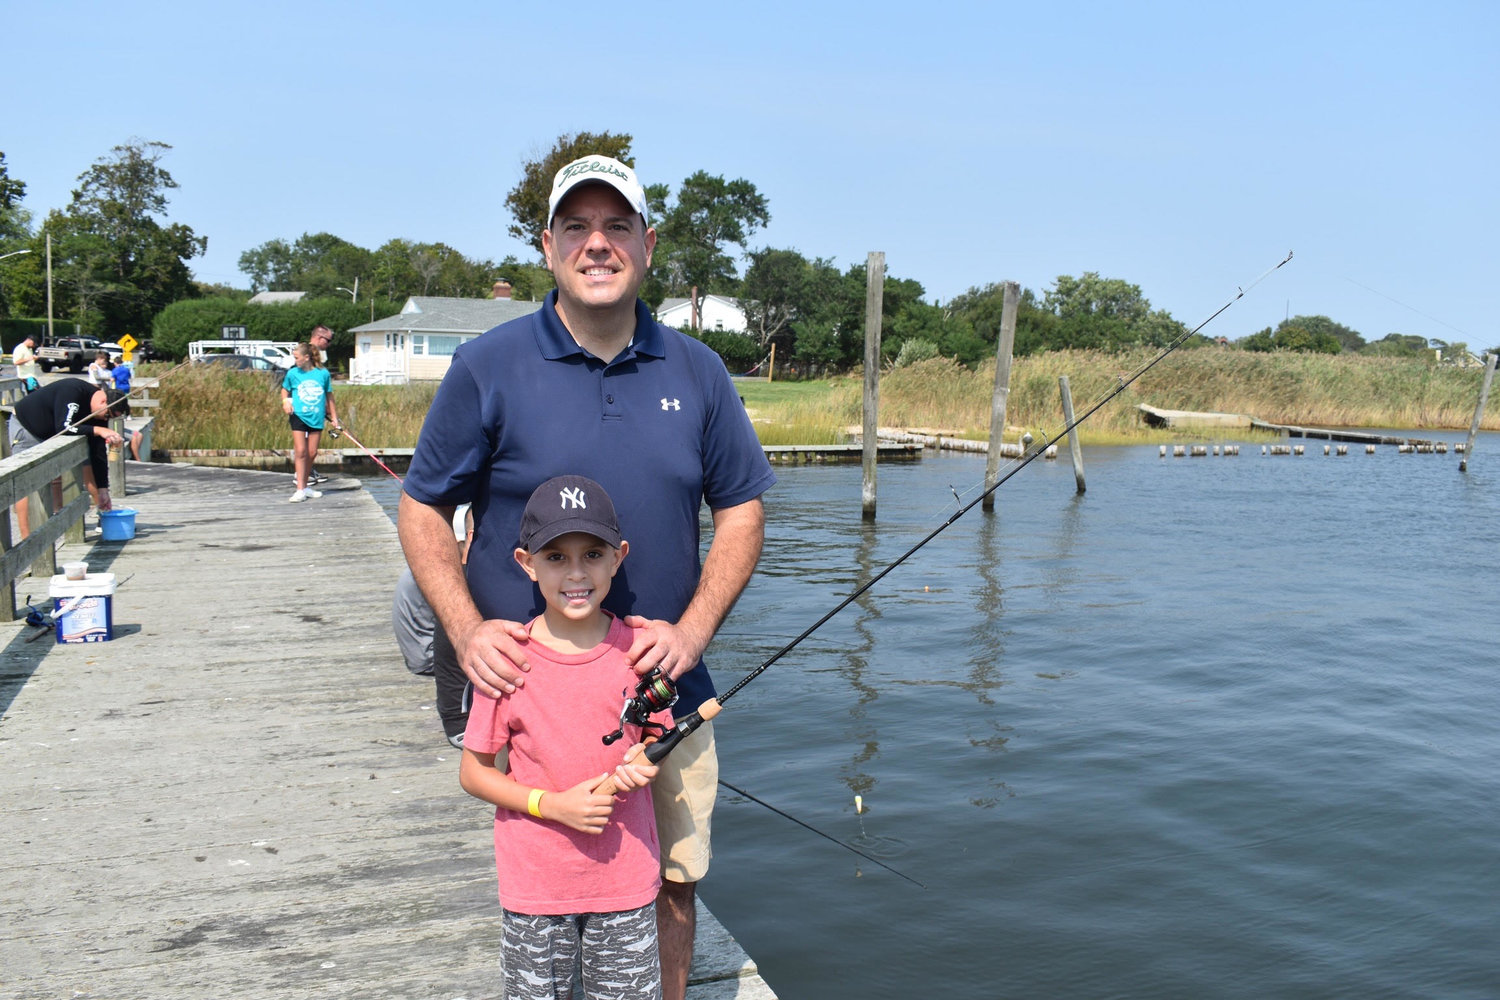 Brookhaven town councilman Dan Panico attended with his son, Grant Panico, who had just caught a fish.